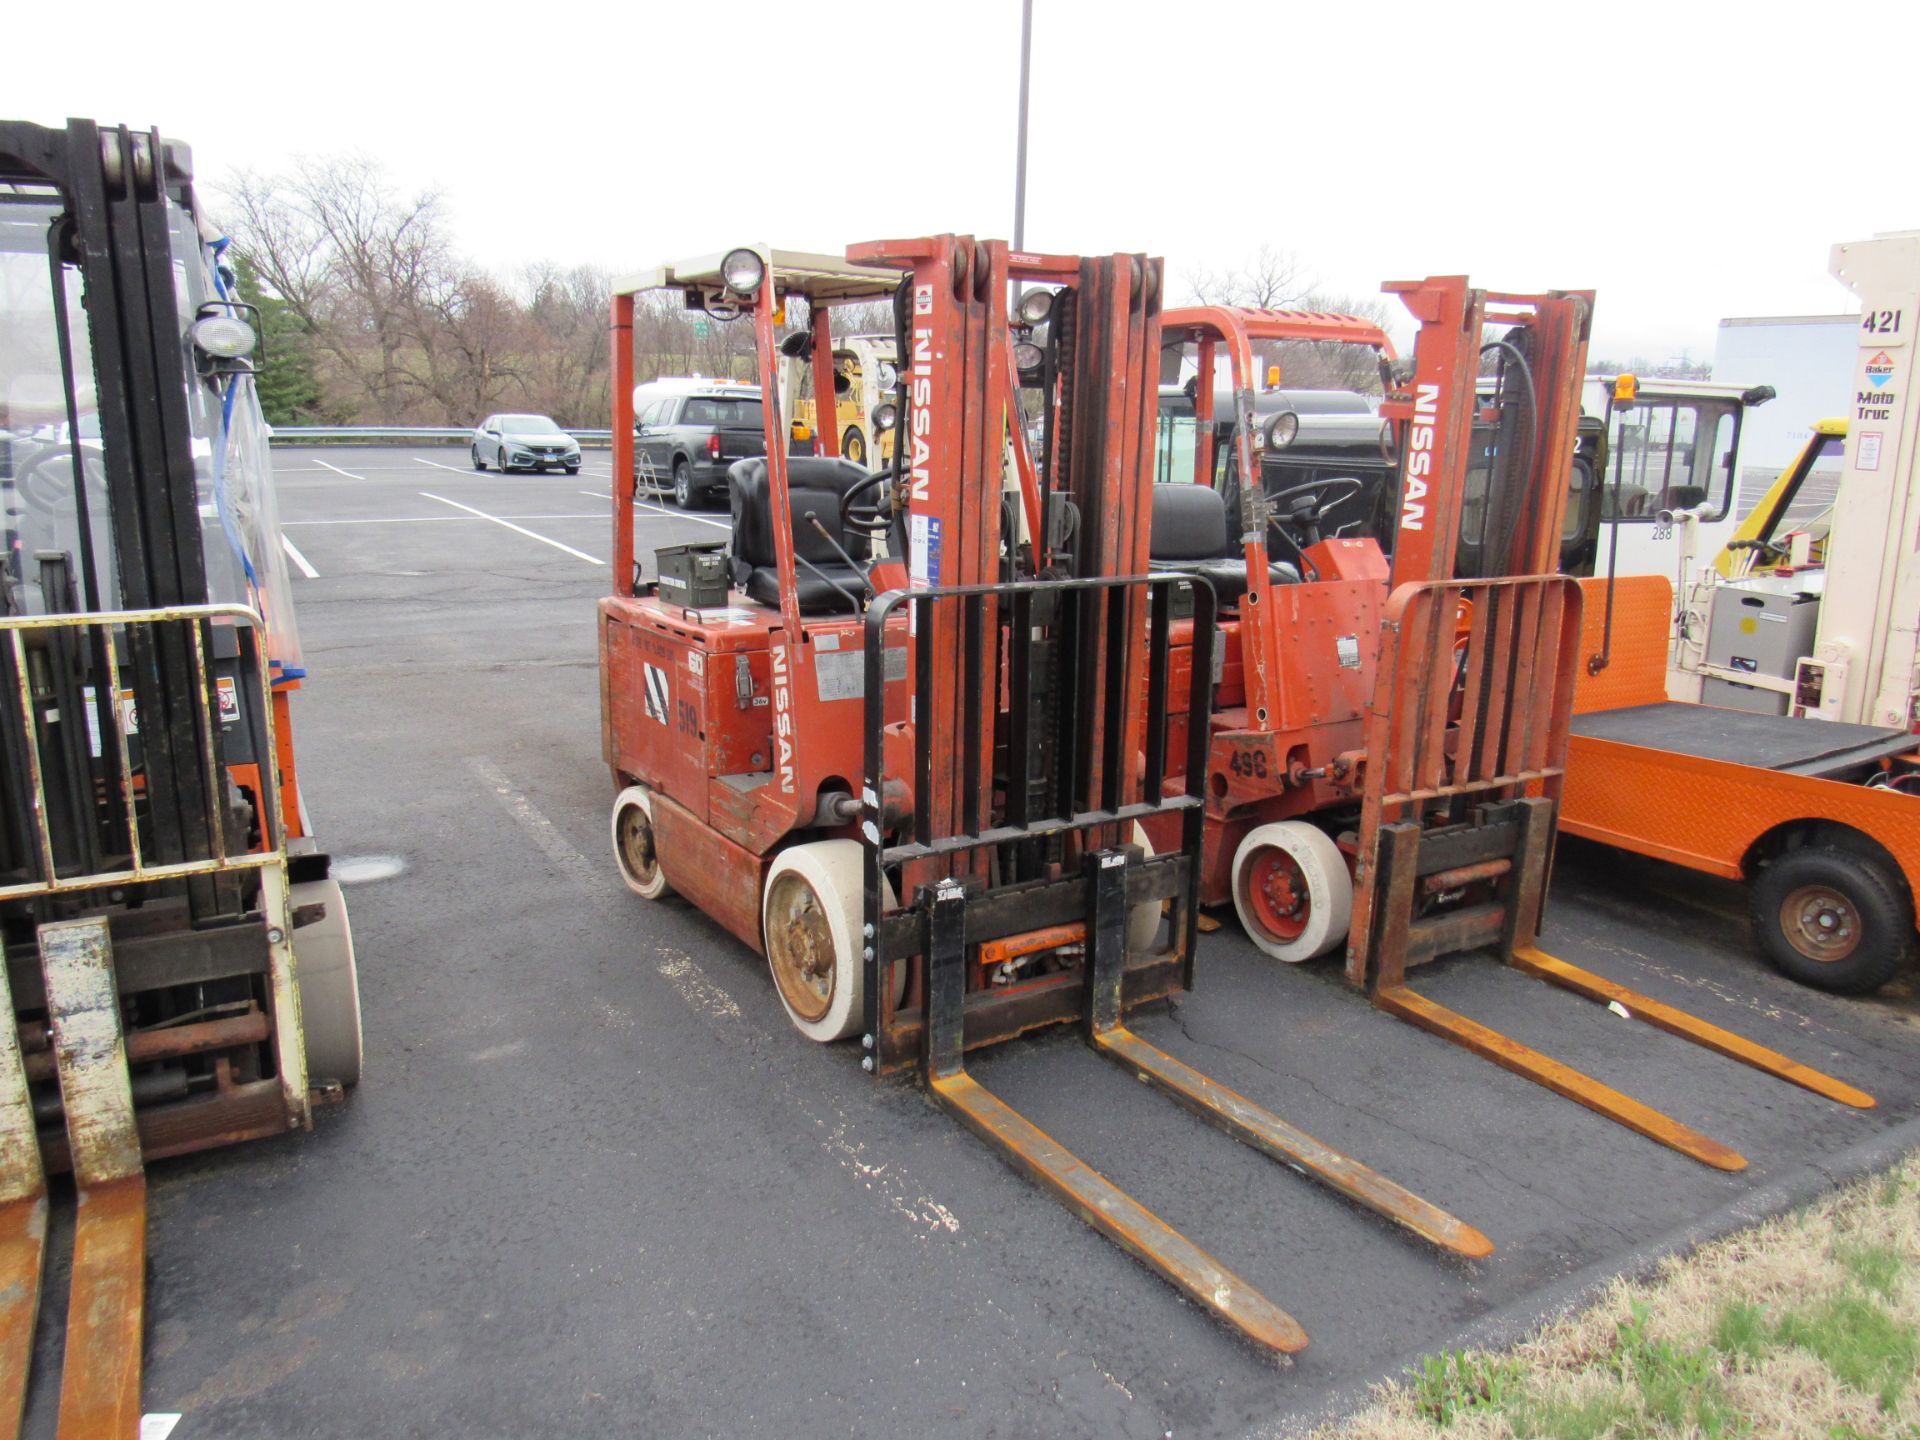 Nissan Forklift, Model #CDGMO, Type = EE, Max Lift Height = 187 Inches - Image 7 of 8